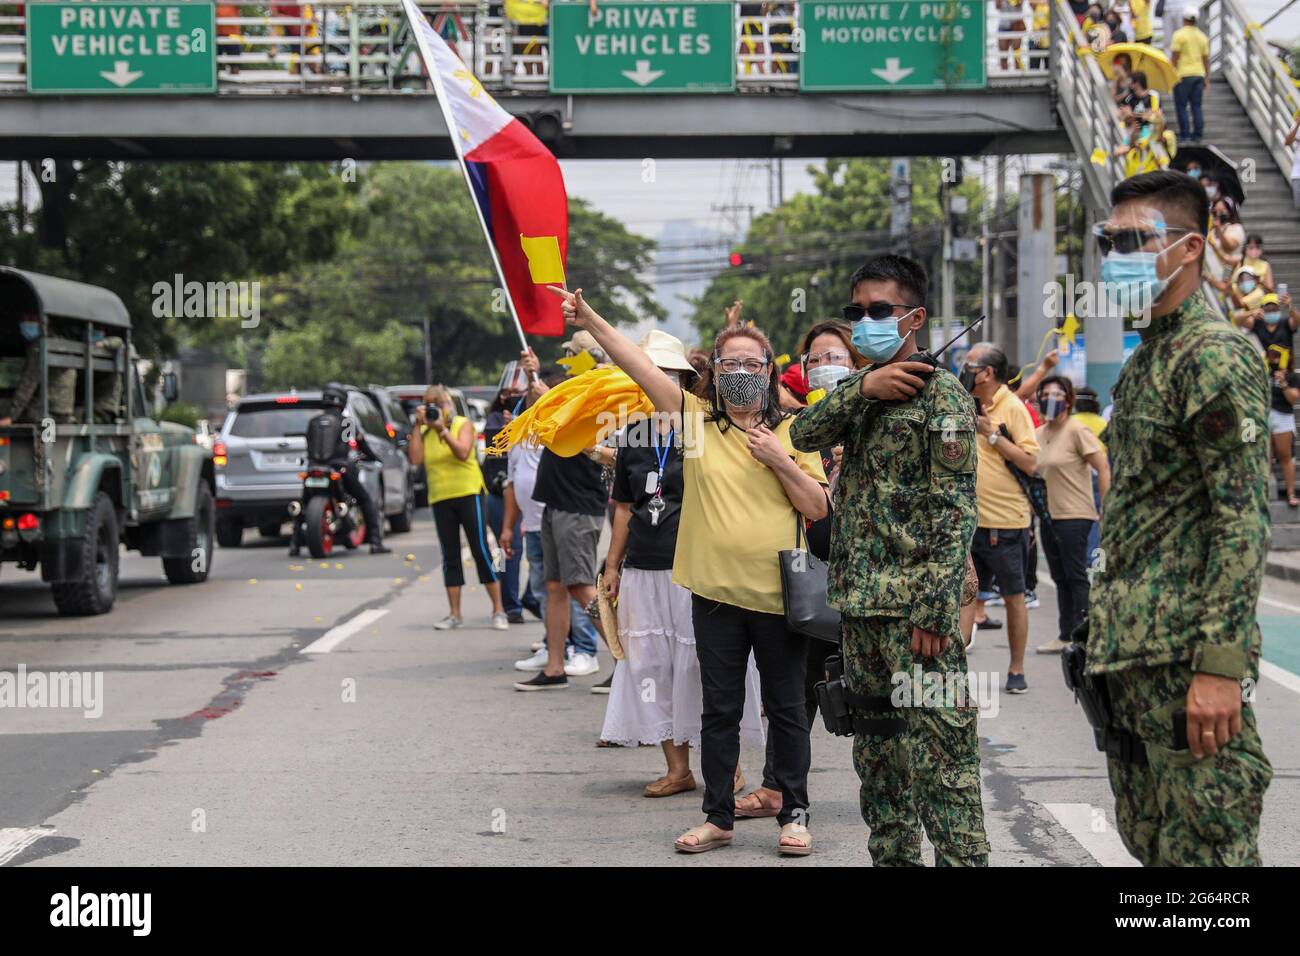 Supporters gather beside the motorcade of former Philippine President Benigno Aquino III before his burial in Quezon City, Philippines. Stock Photo